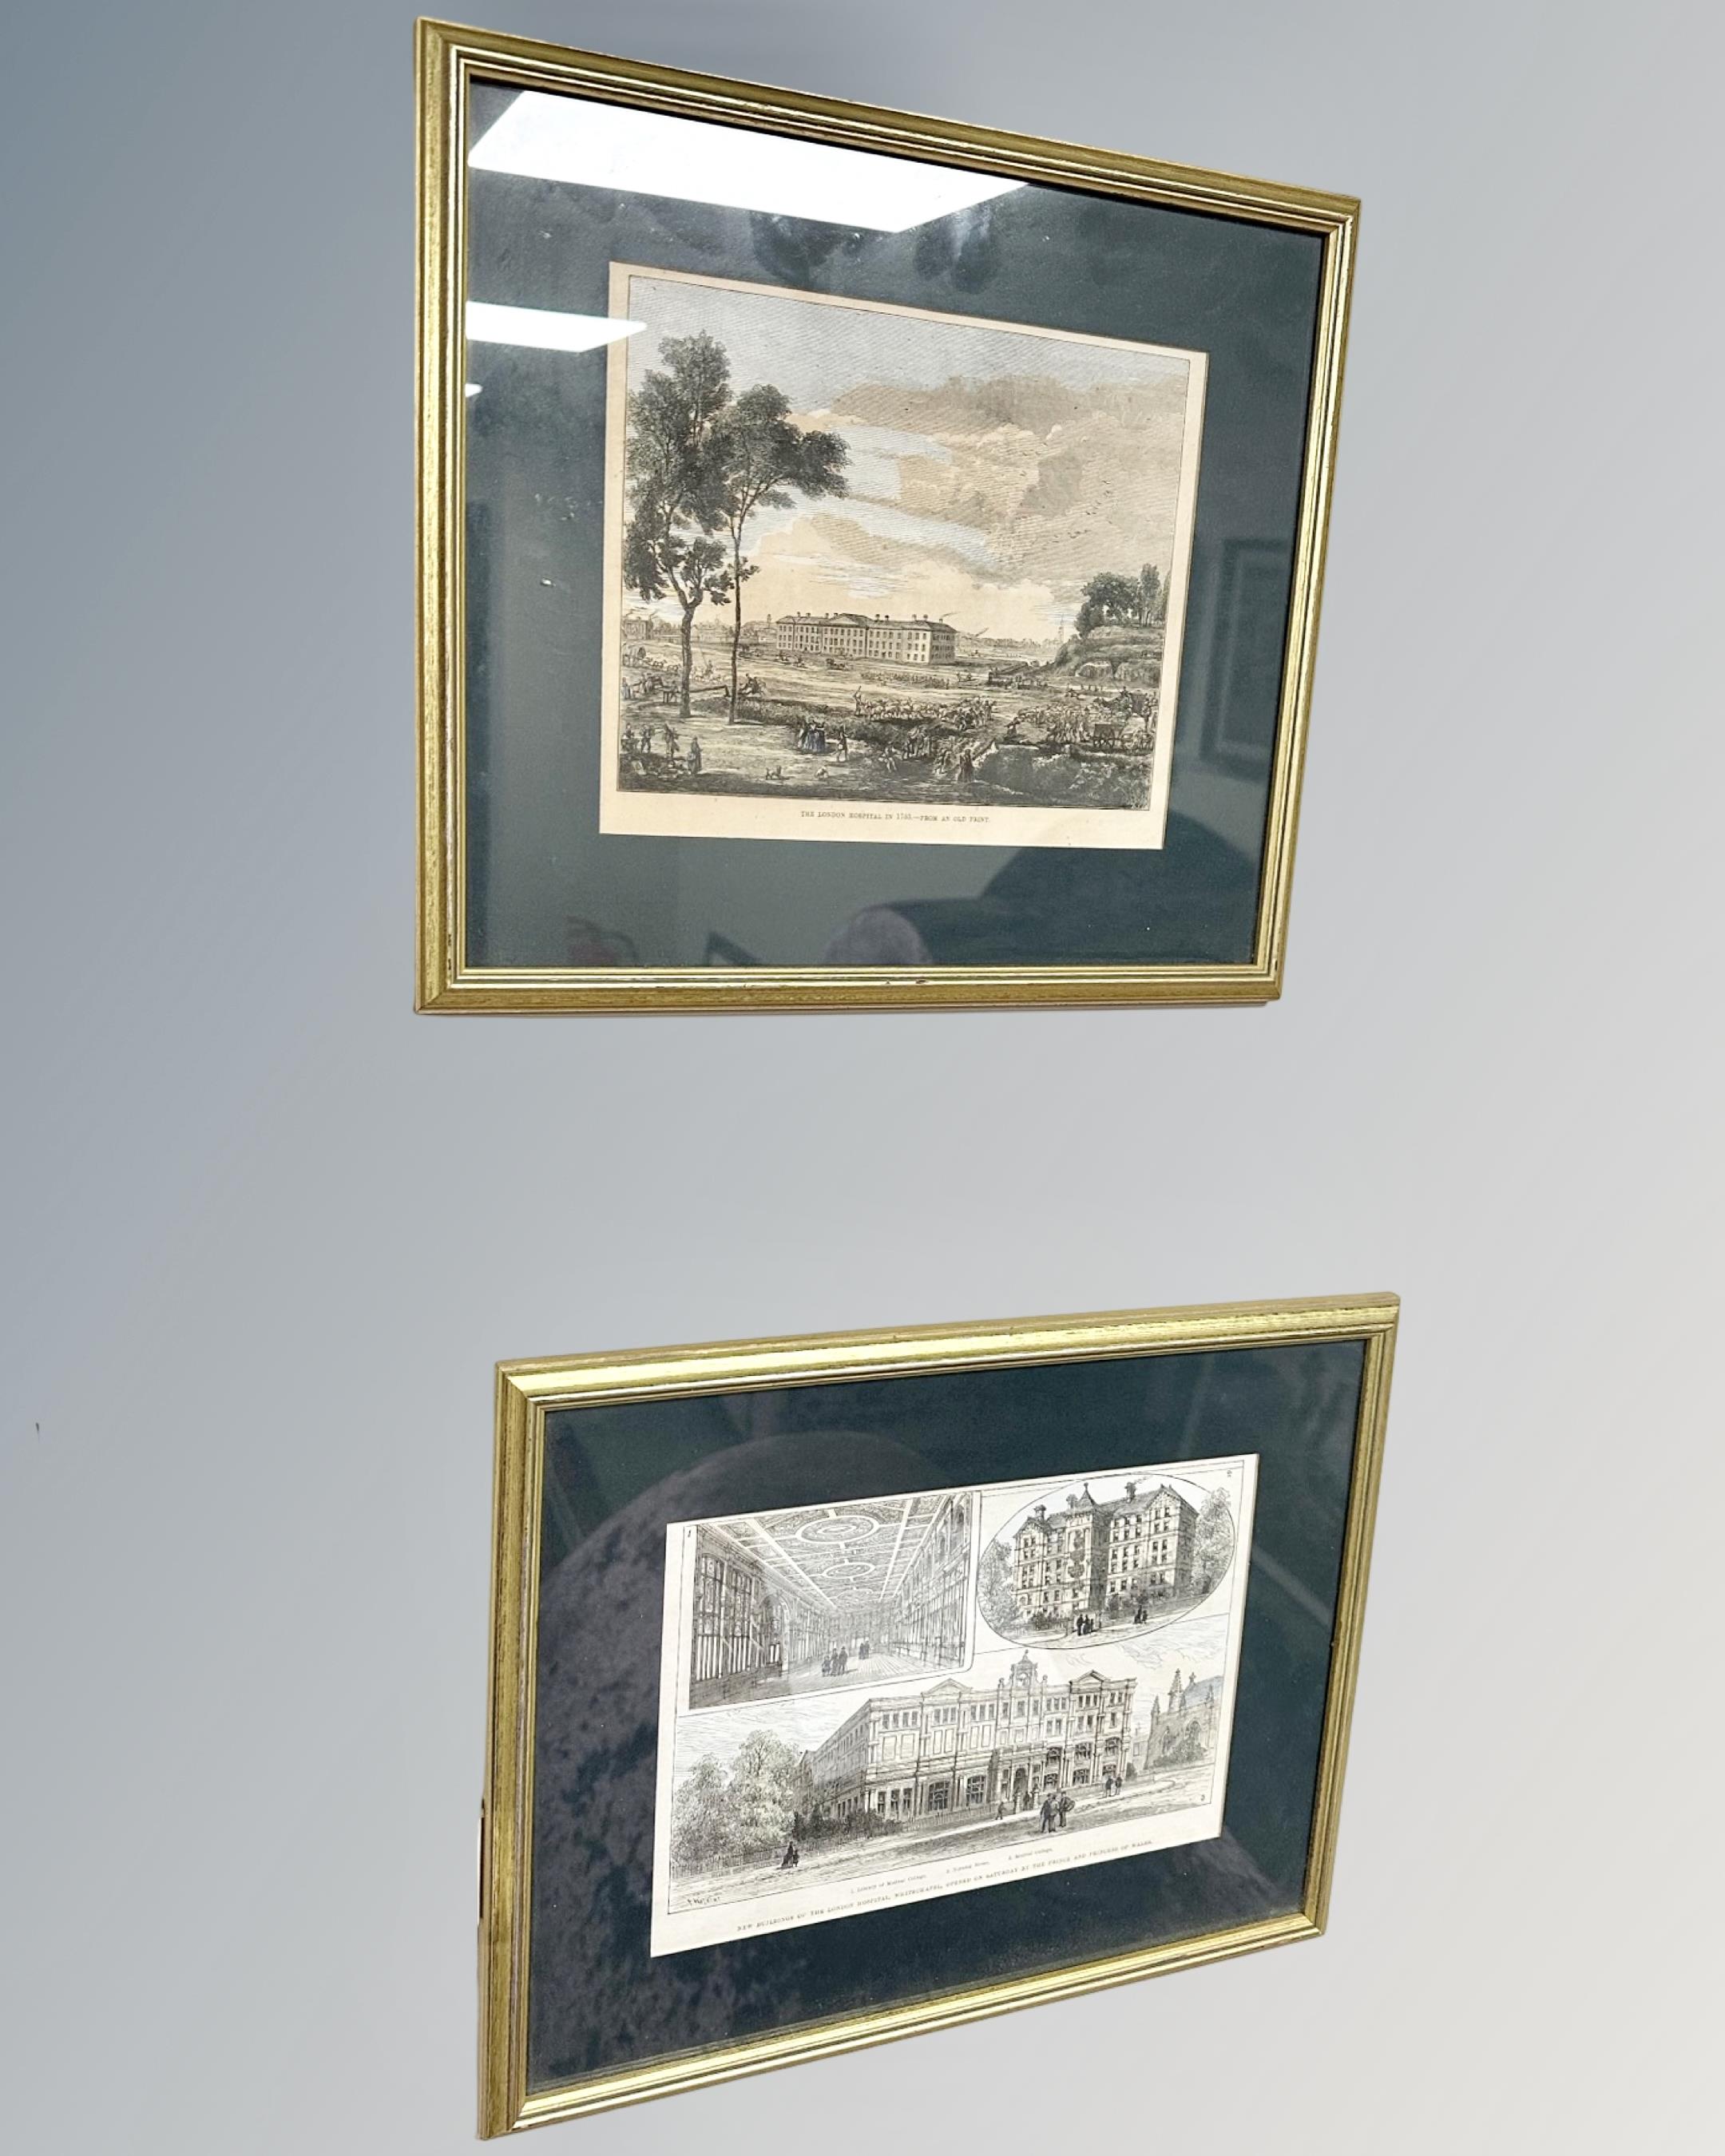 Two hand coloured prints depicting The London Hospital in 1753, each 24 cm x 17 cm.